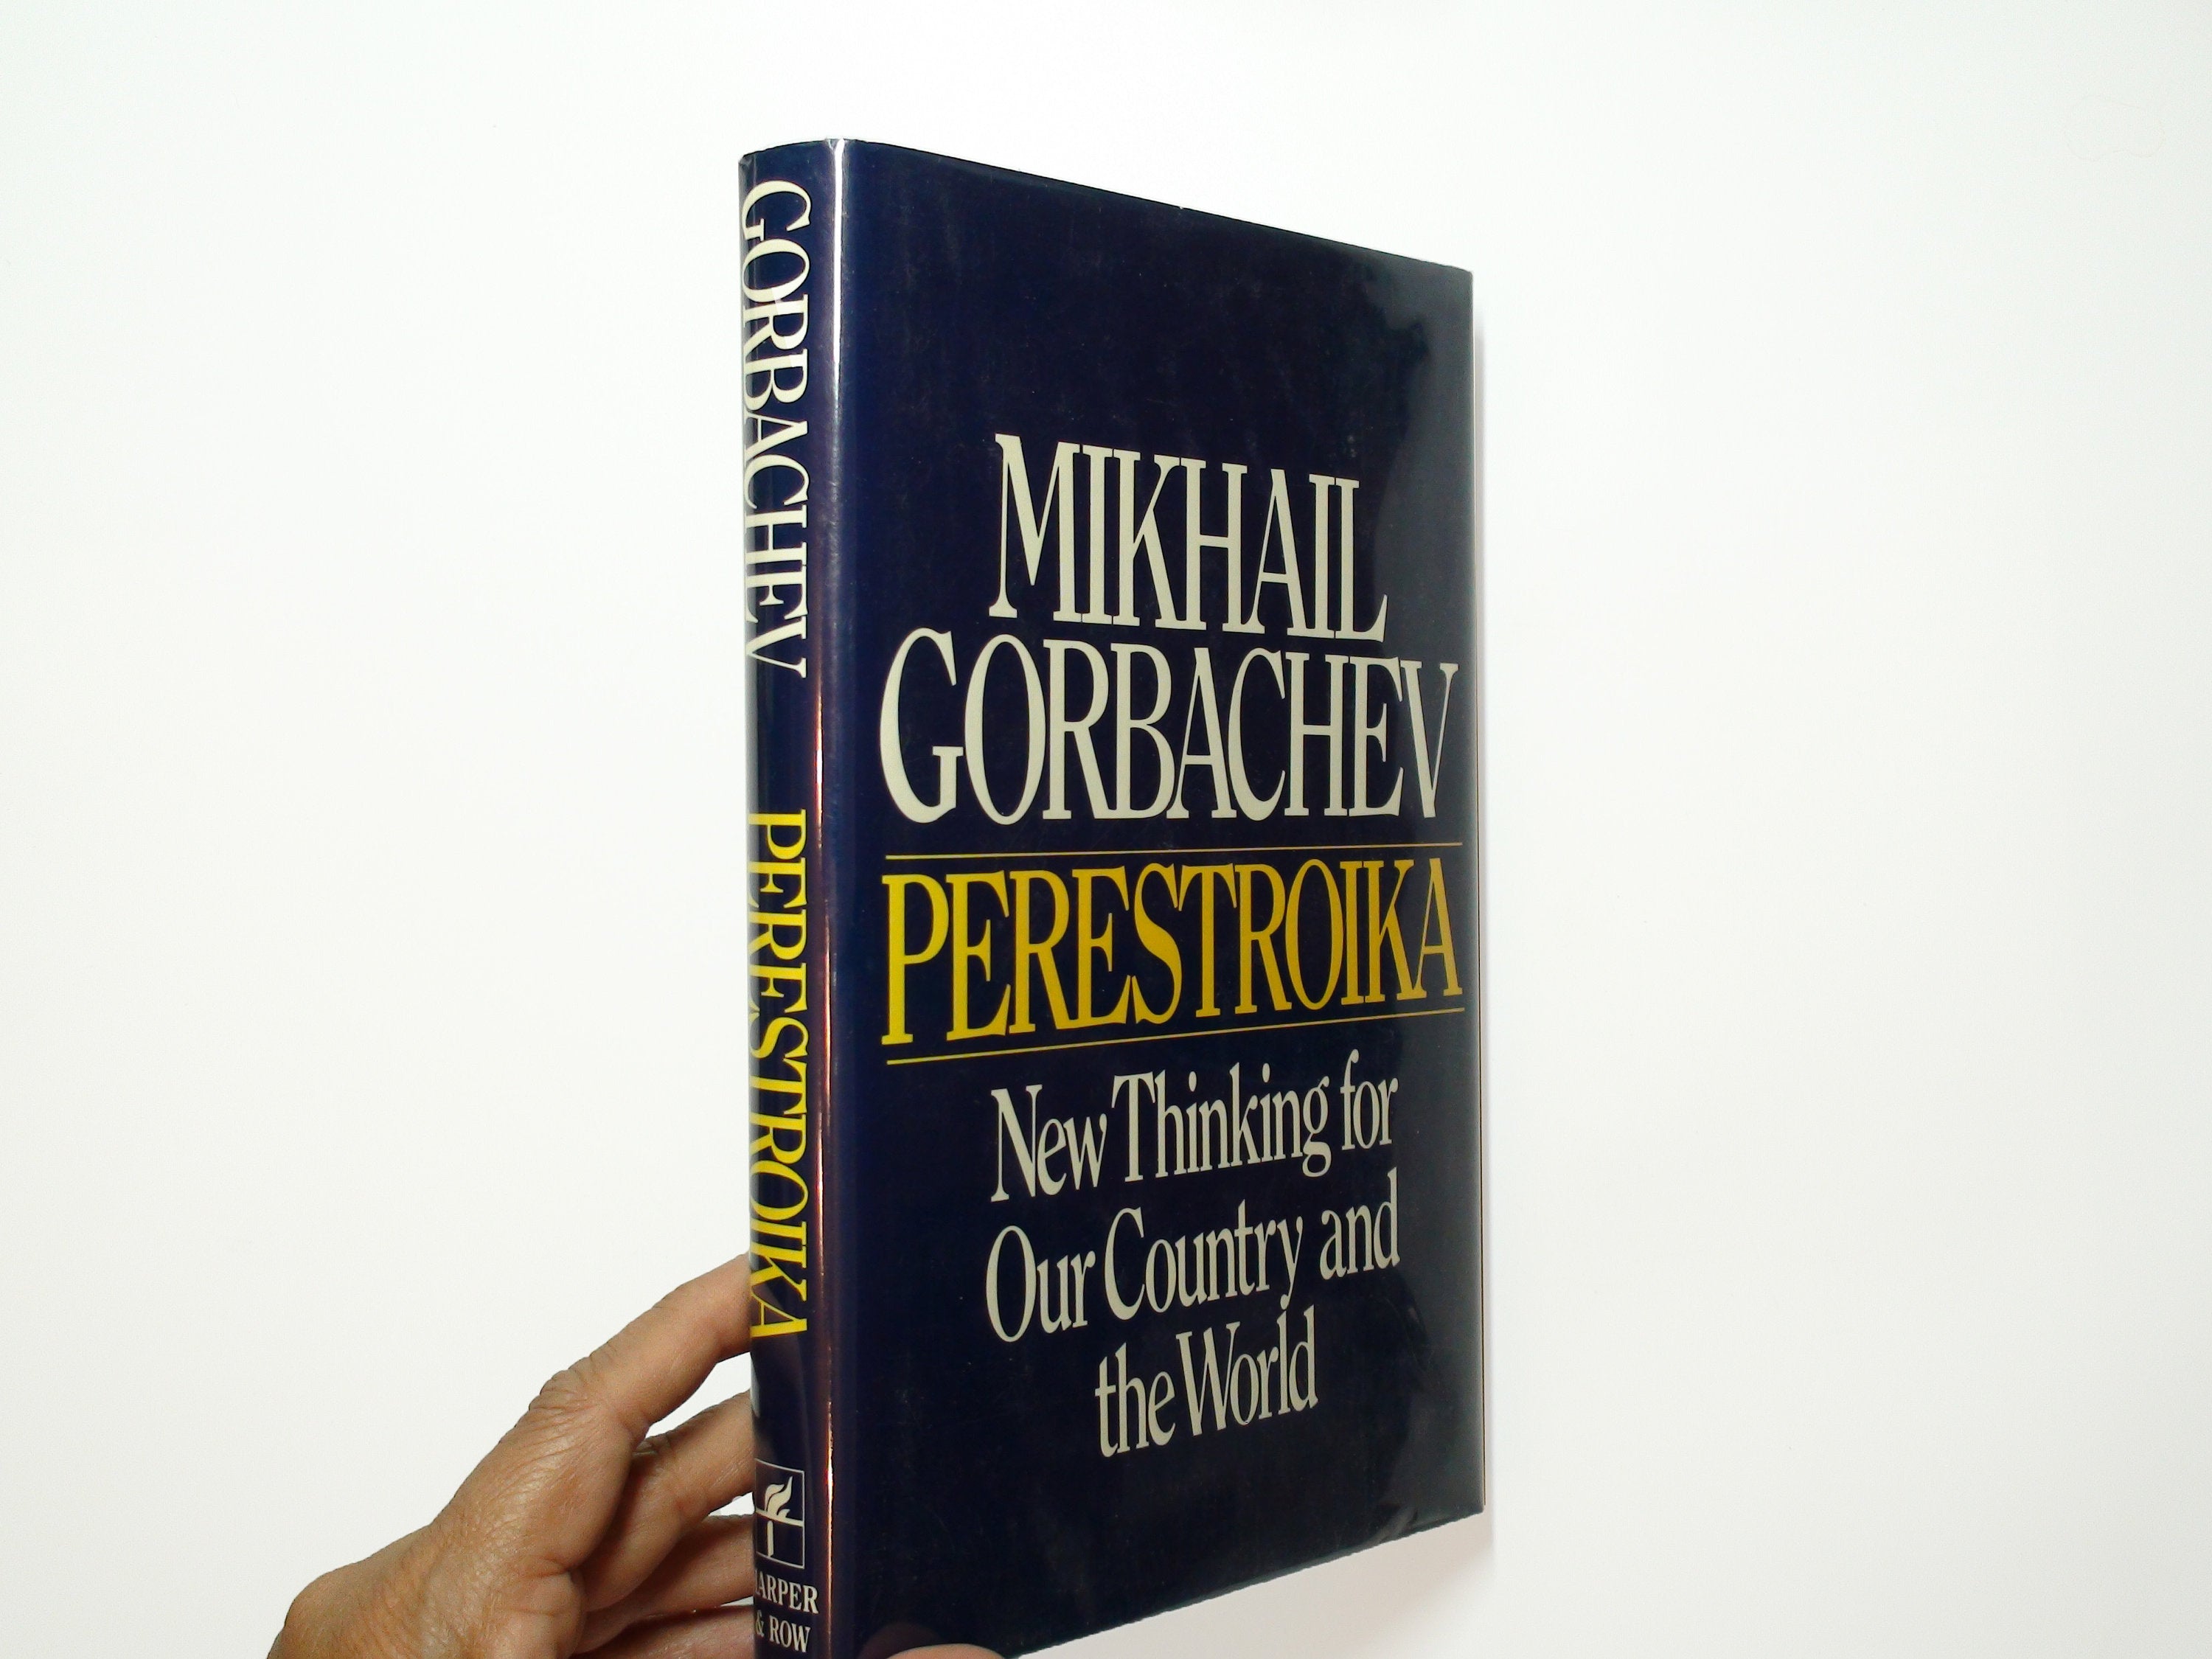 Perestroika, New Thinking for Our Country and the World, Mikhail Gorbachev, 1987